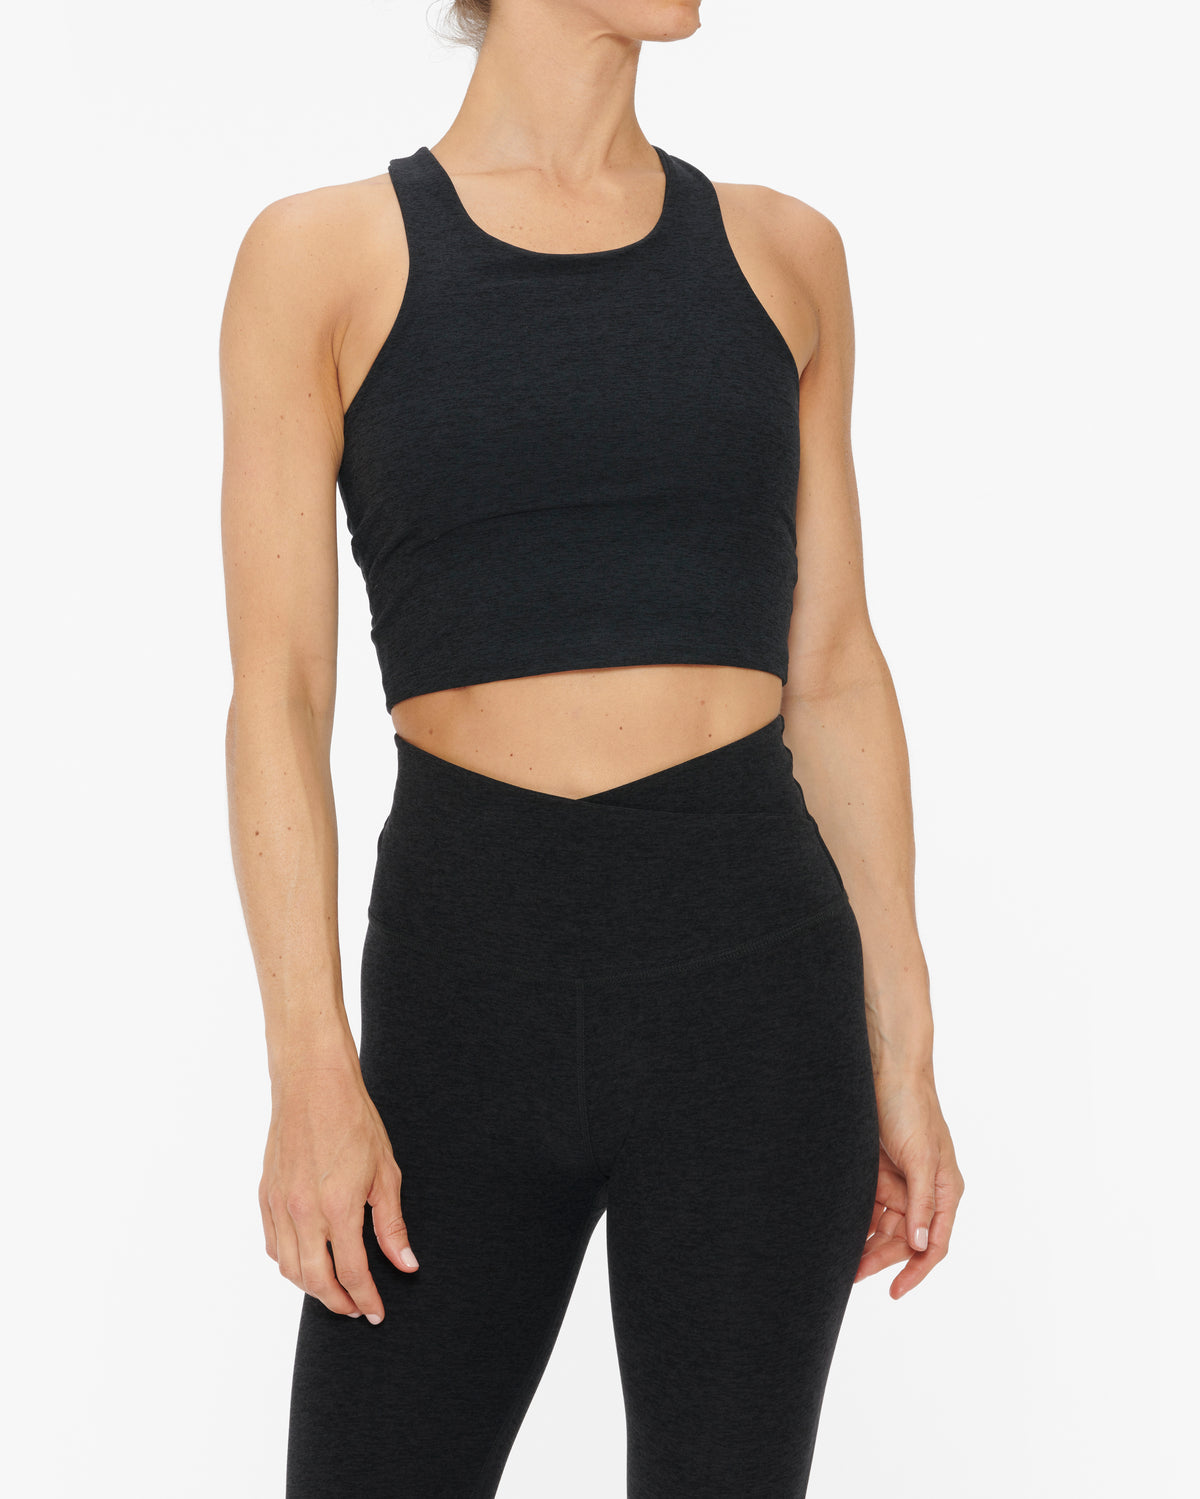 All Fenix Madison Racer Crop – The Shop at Equinox